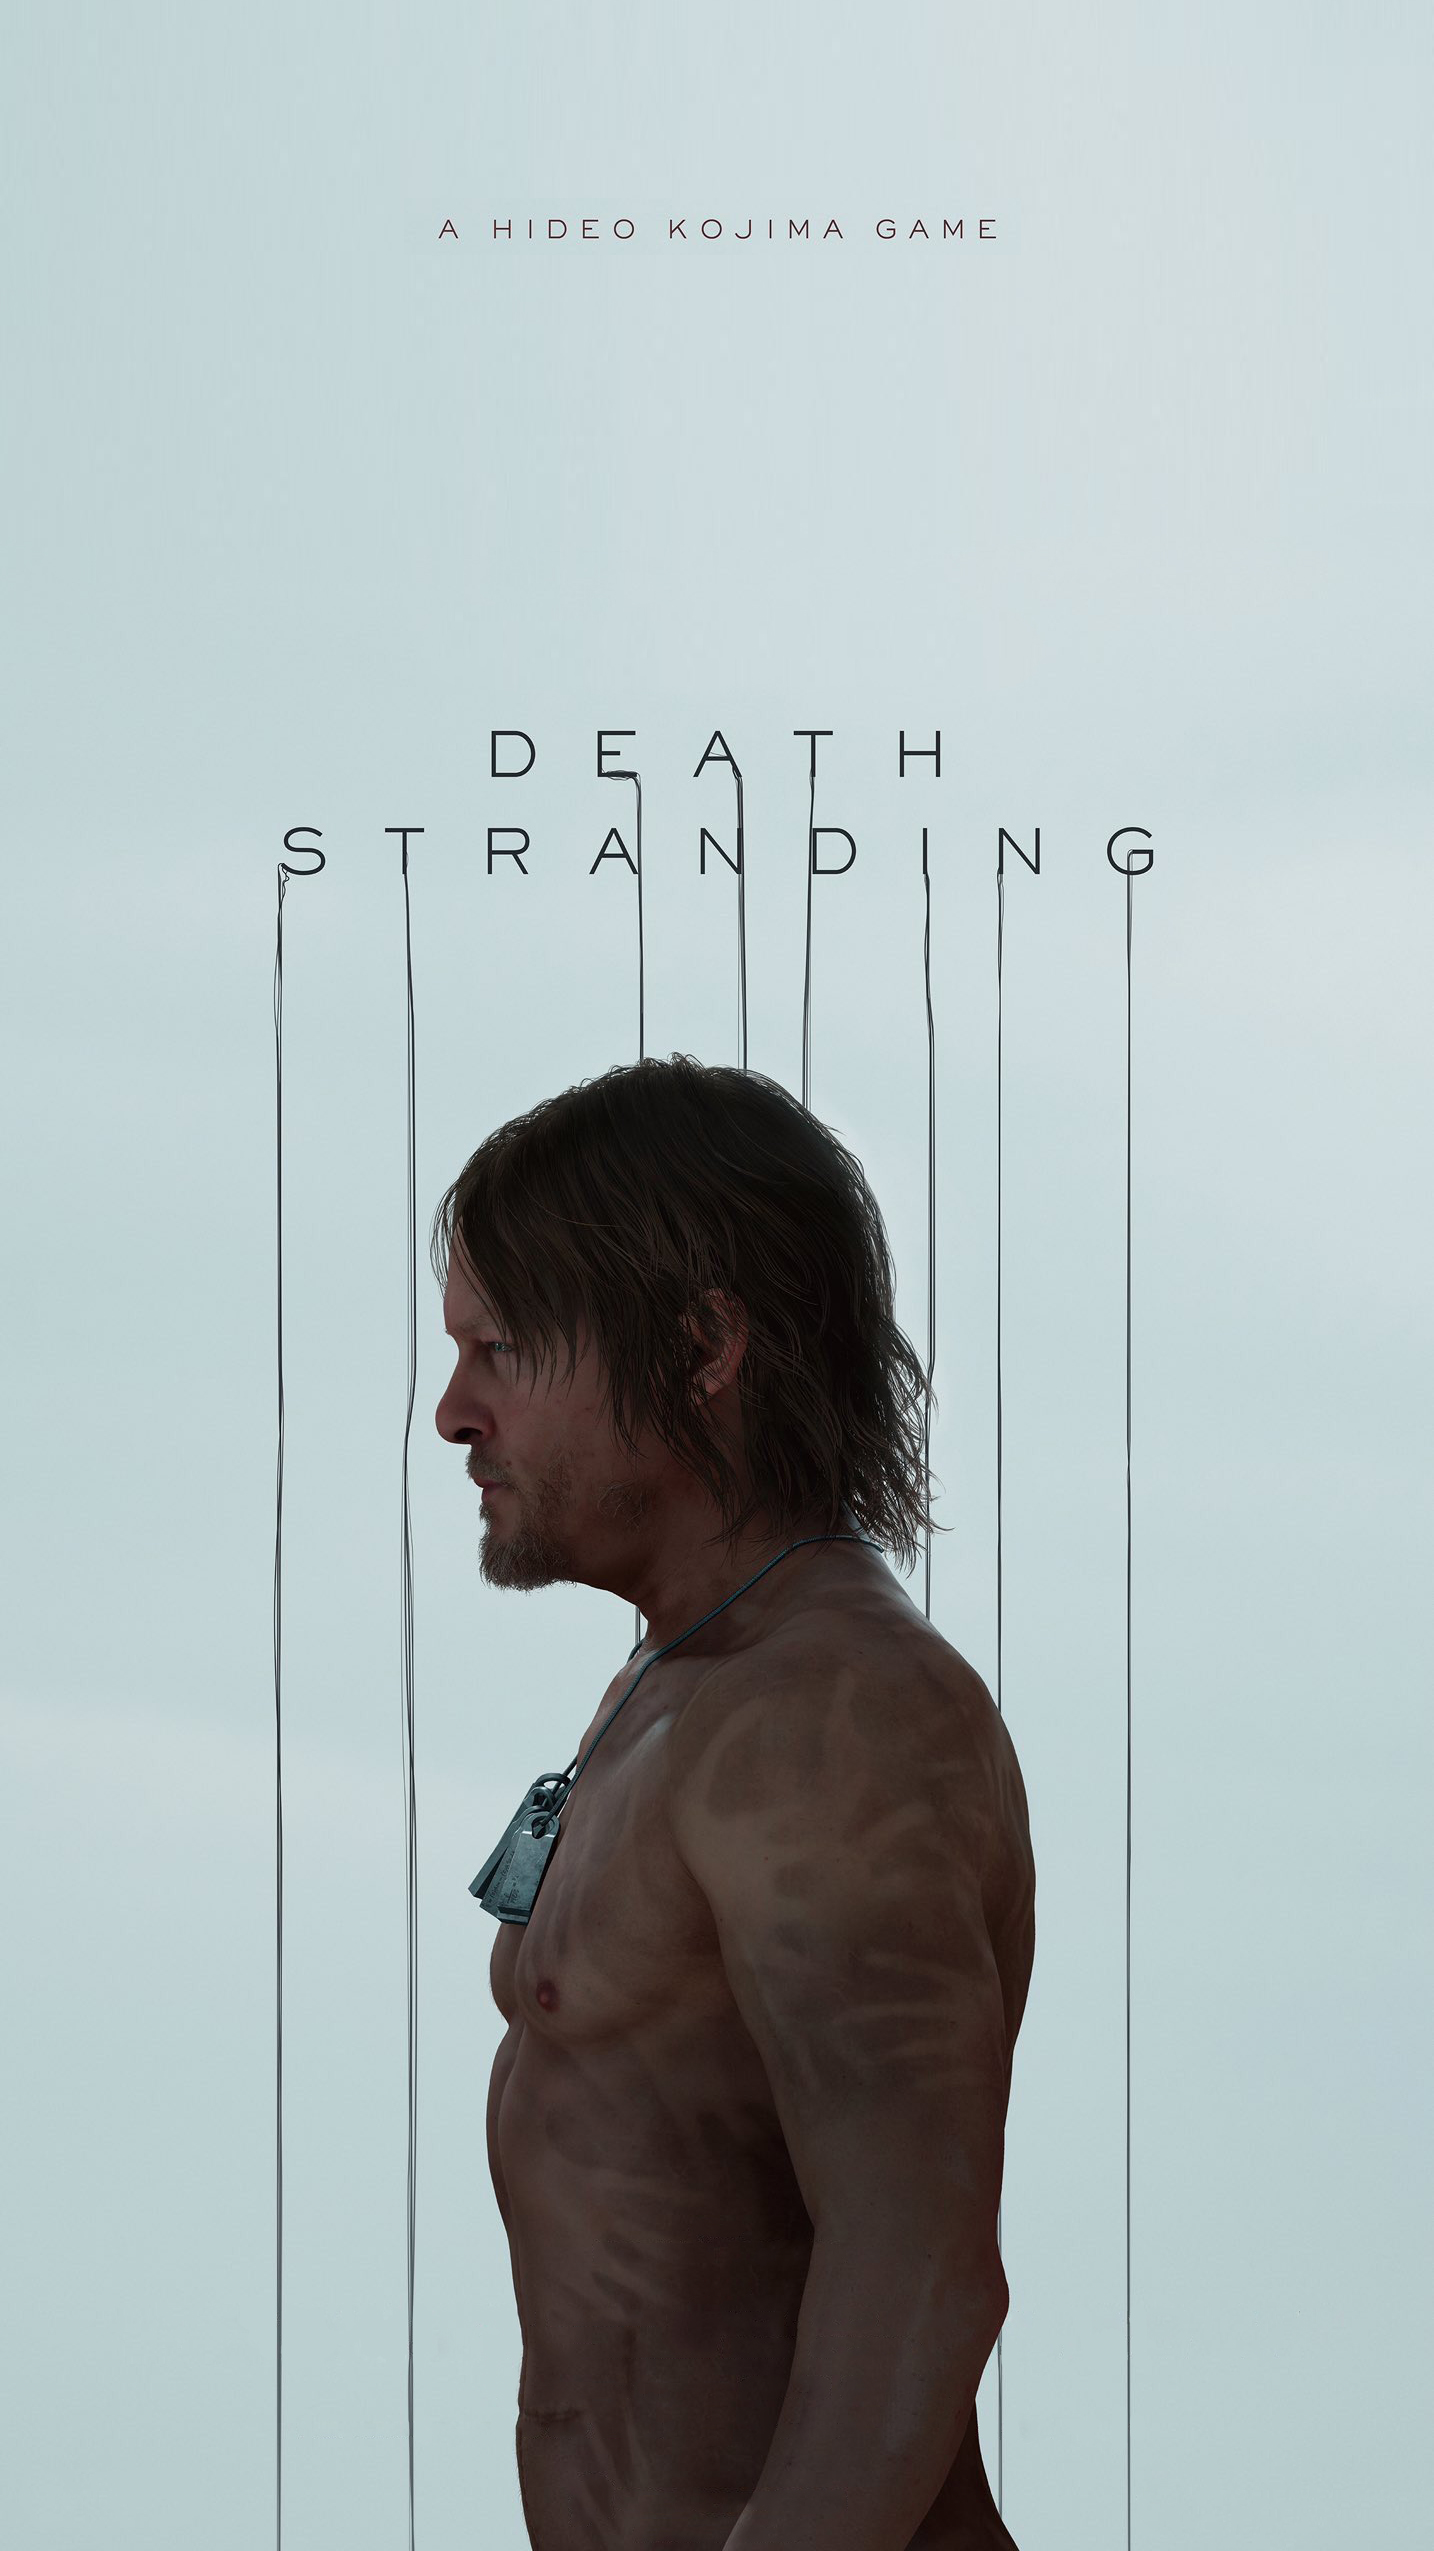 Death Stranding 2 Theories Explain the Masked Figure's Identity